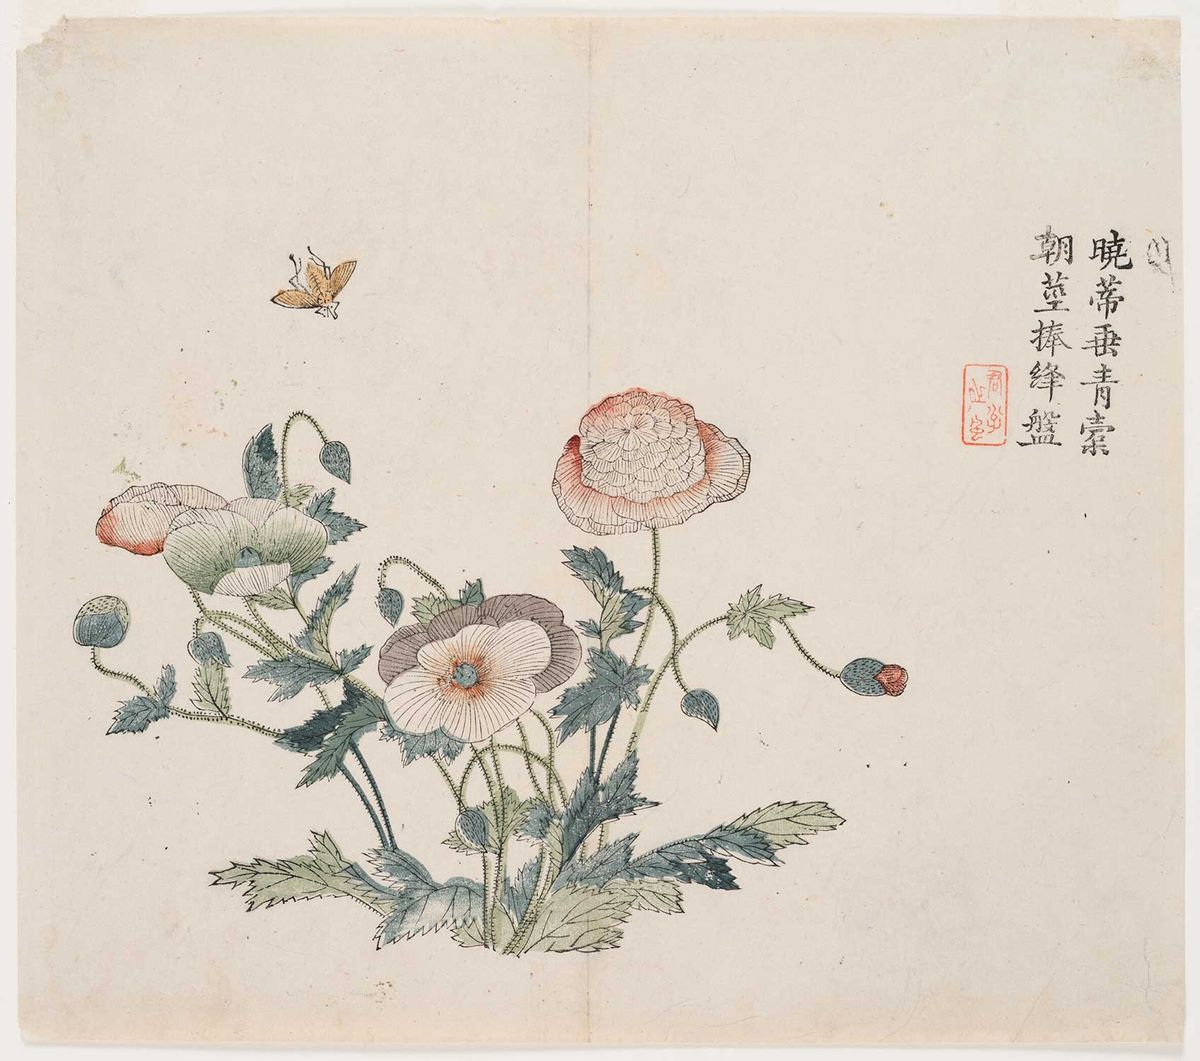 Pretty, but deadly: an illustration of poppies, from which opium comes, from an 18th-century Chinese woodblock printed book

Photo: © President and Fellows of Harvard College; courtesy of the Harvard Art Museums


